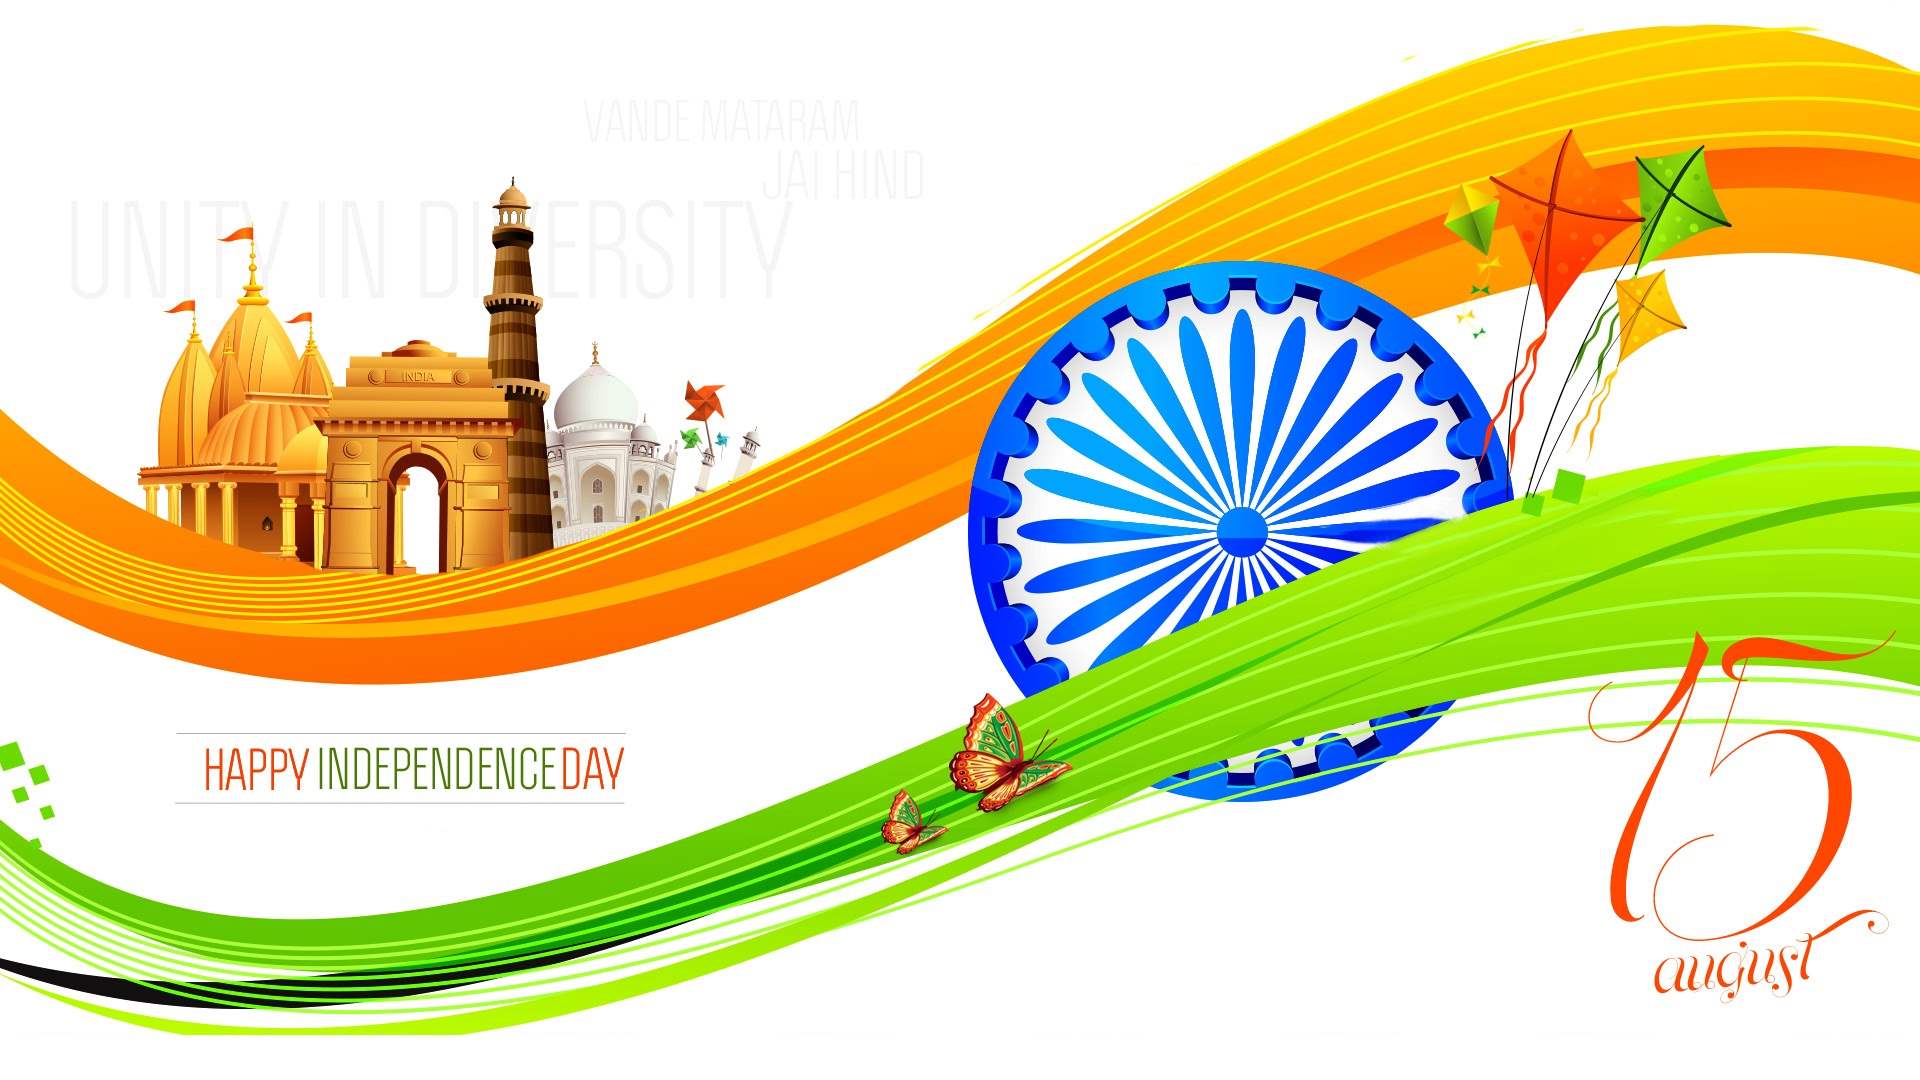 independence day wallpapers free download india independence day 2015